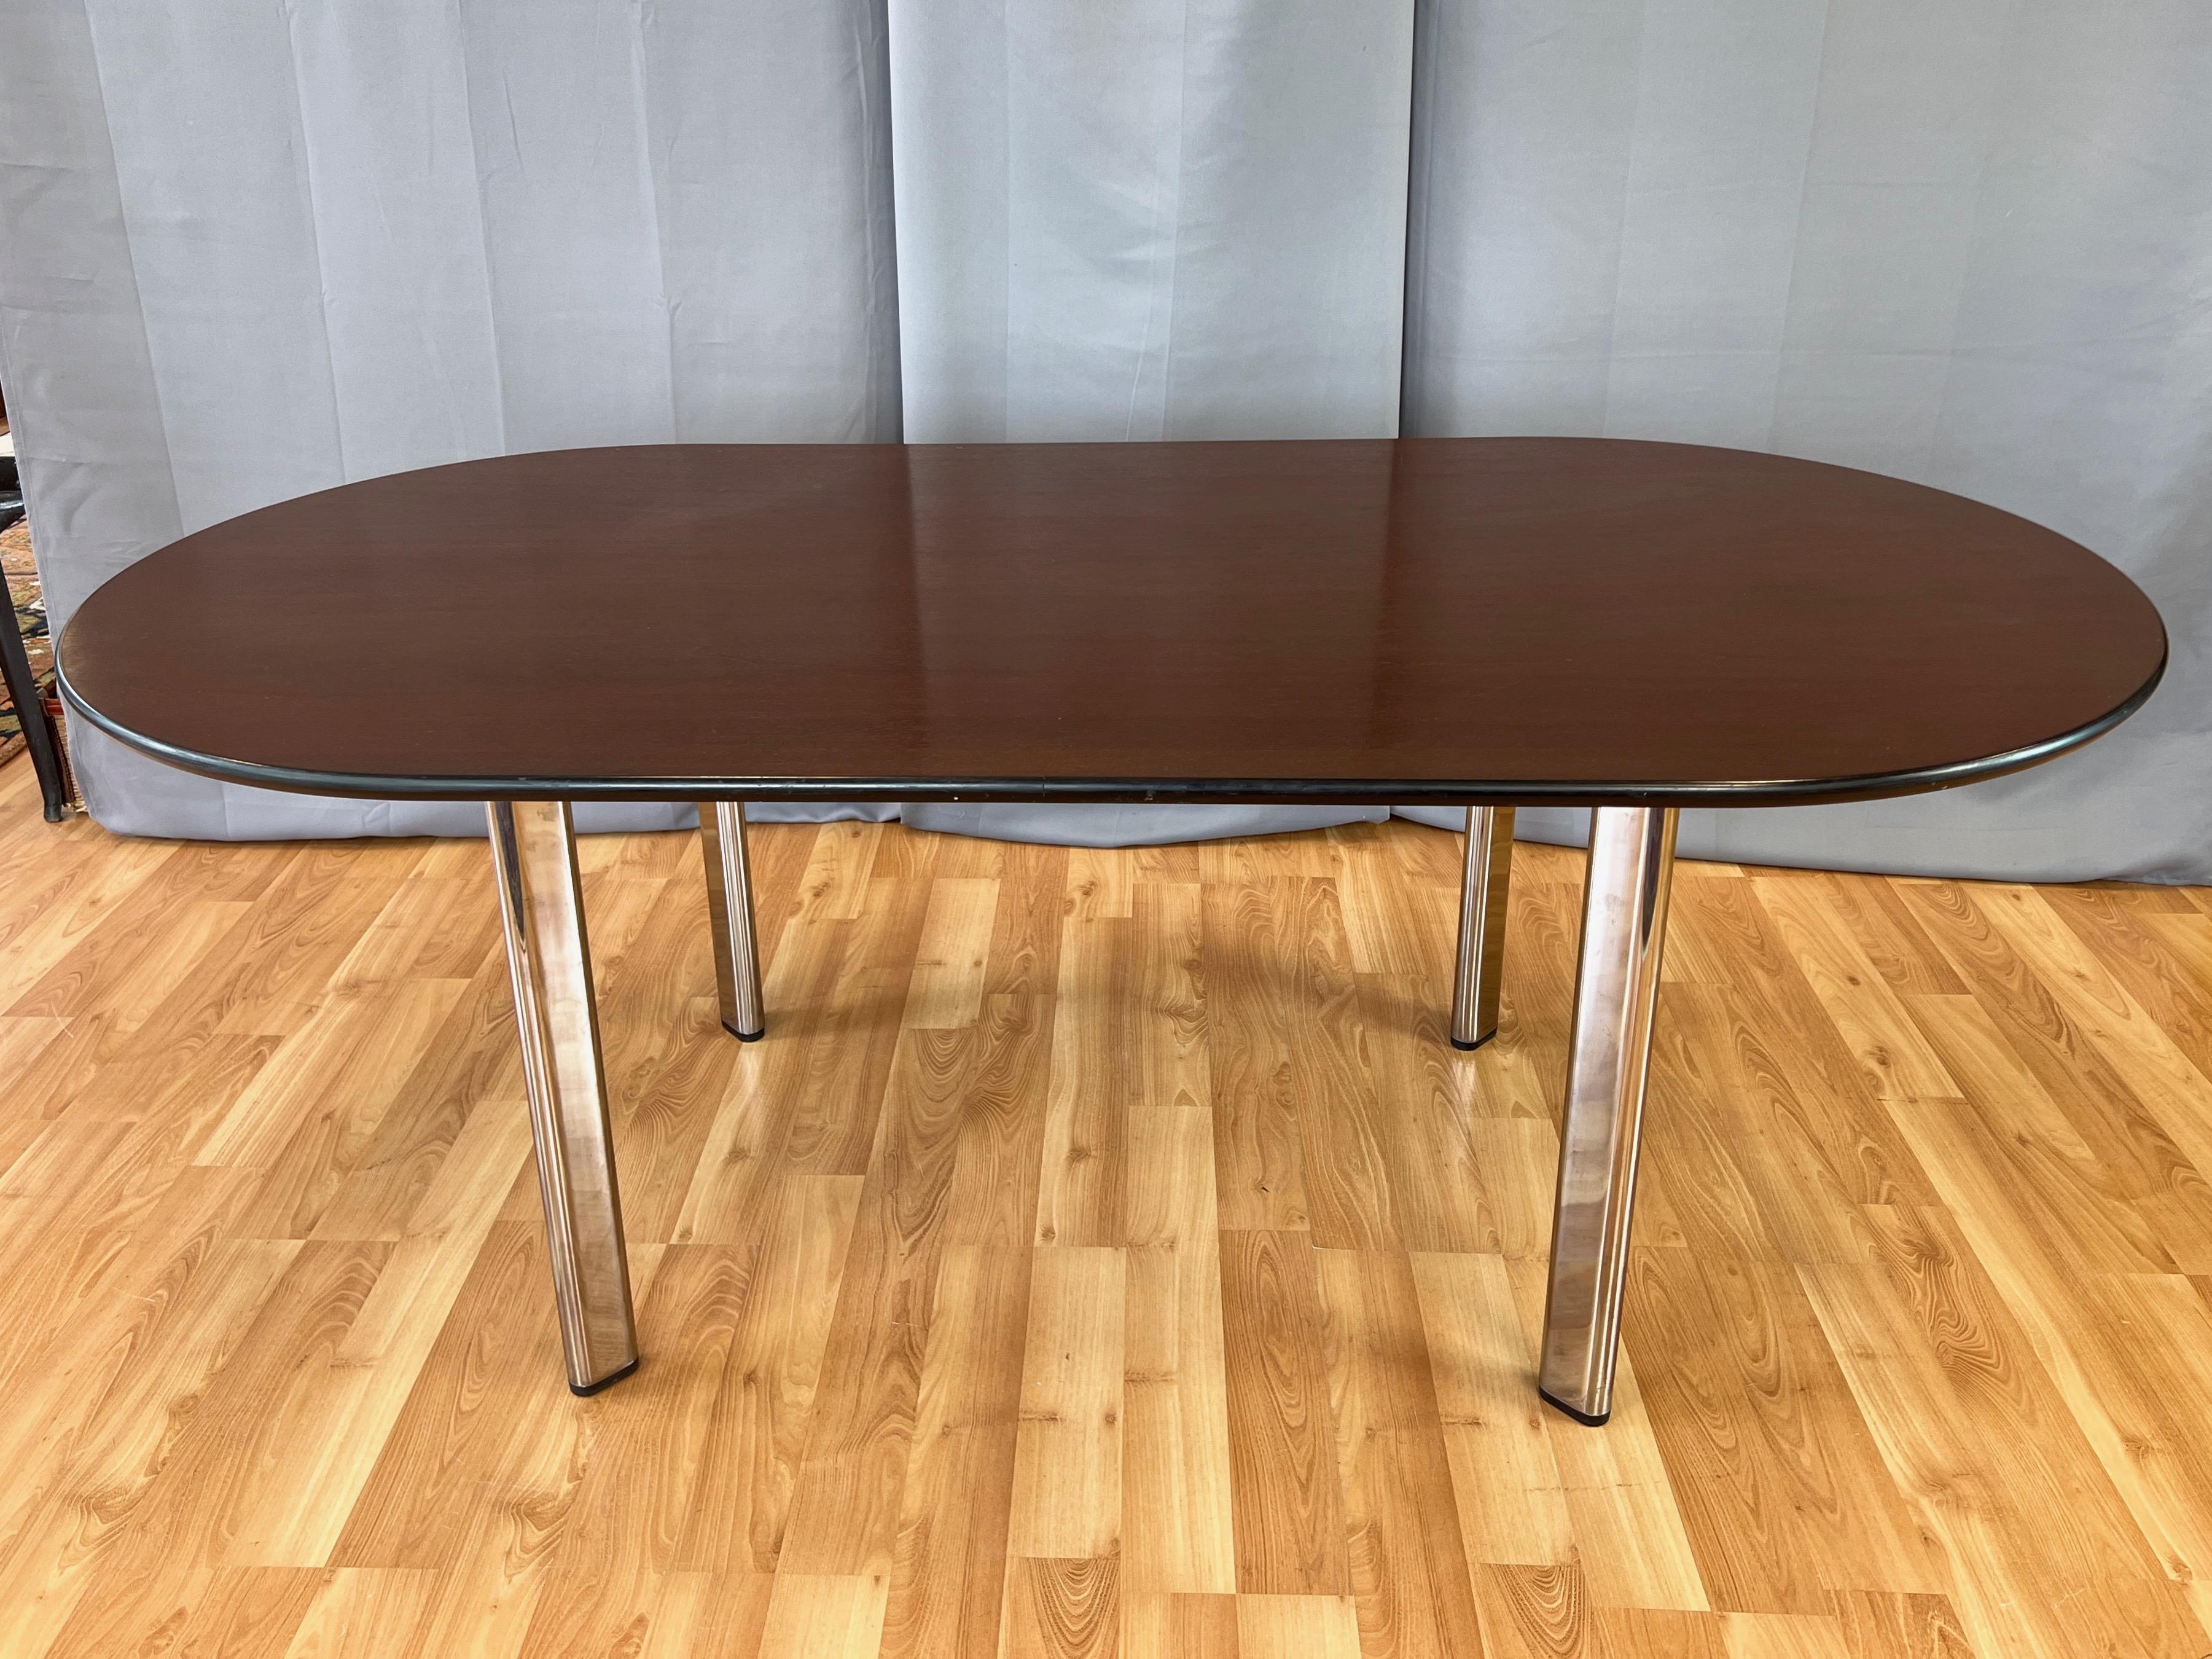 Powder-Coated Joseph D’Urso for Knoll High Table in American Cherry and Chrome, 1995 For Sale